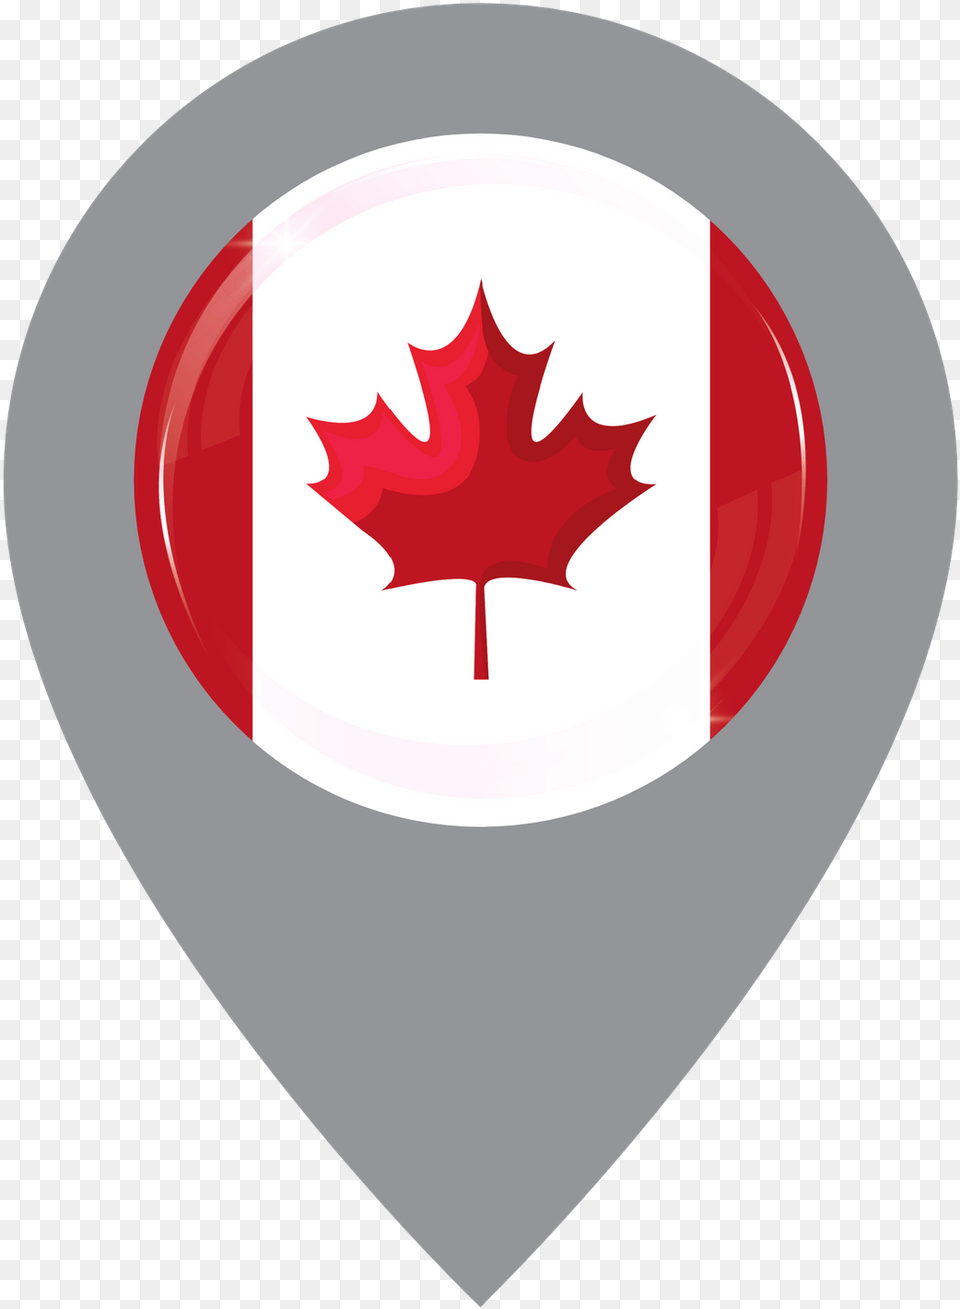 Ipac Directory Usa Pros Canada Day Gif Heart, Leaf, Plant, Logo Png Image